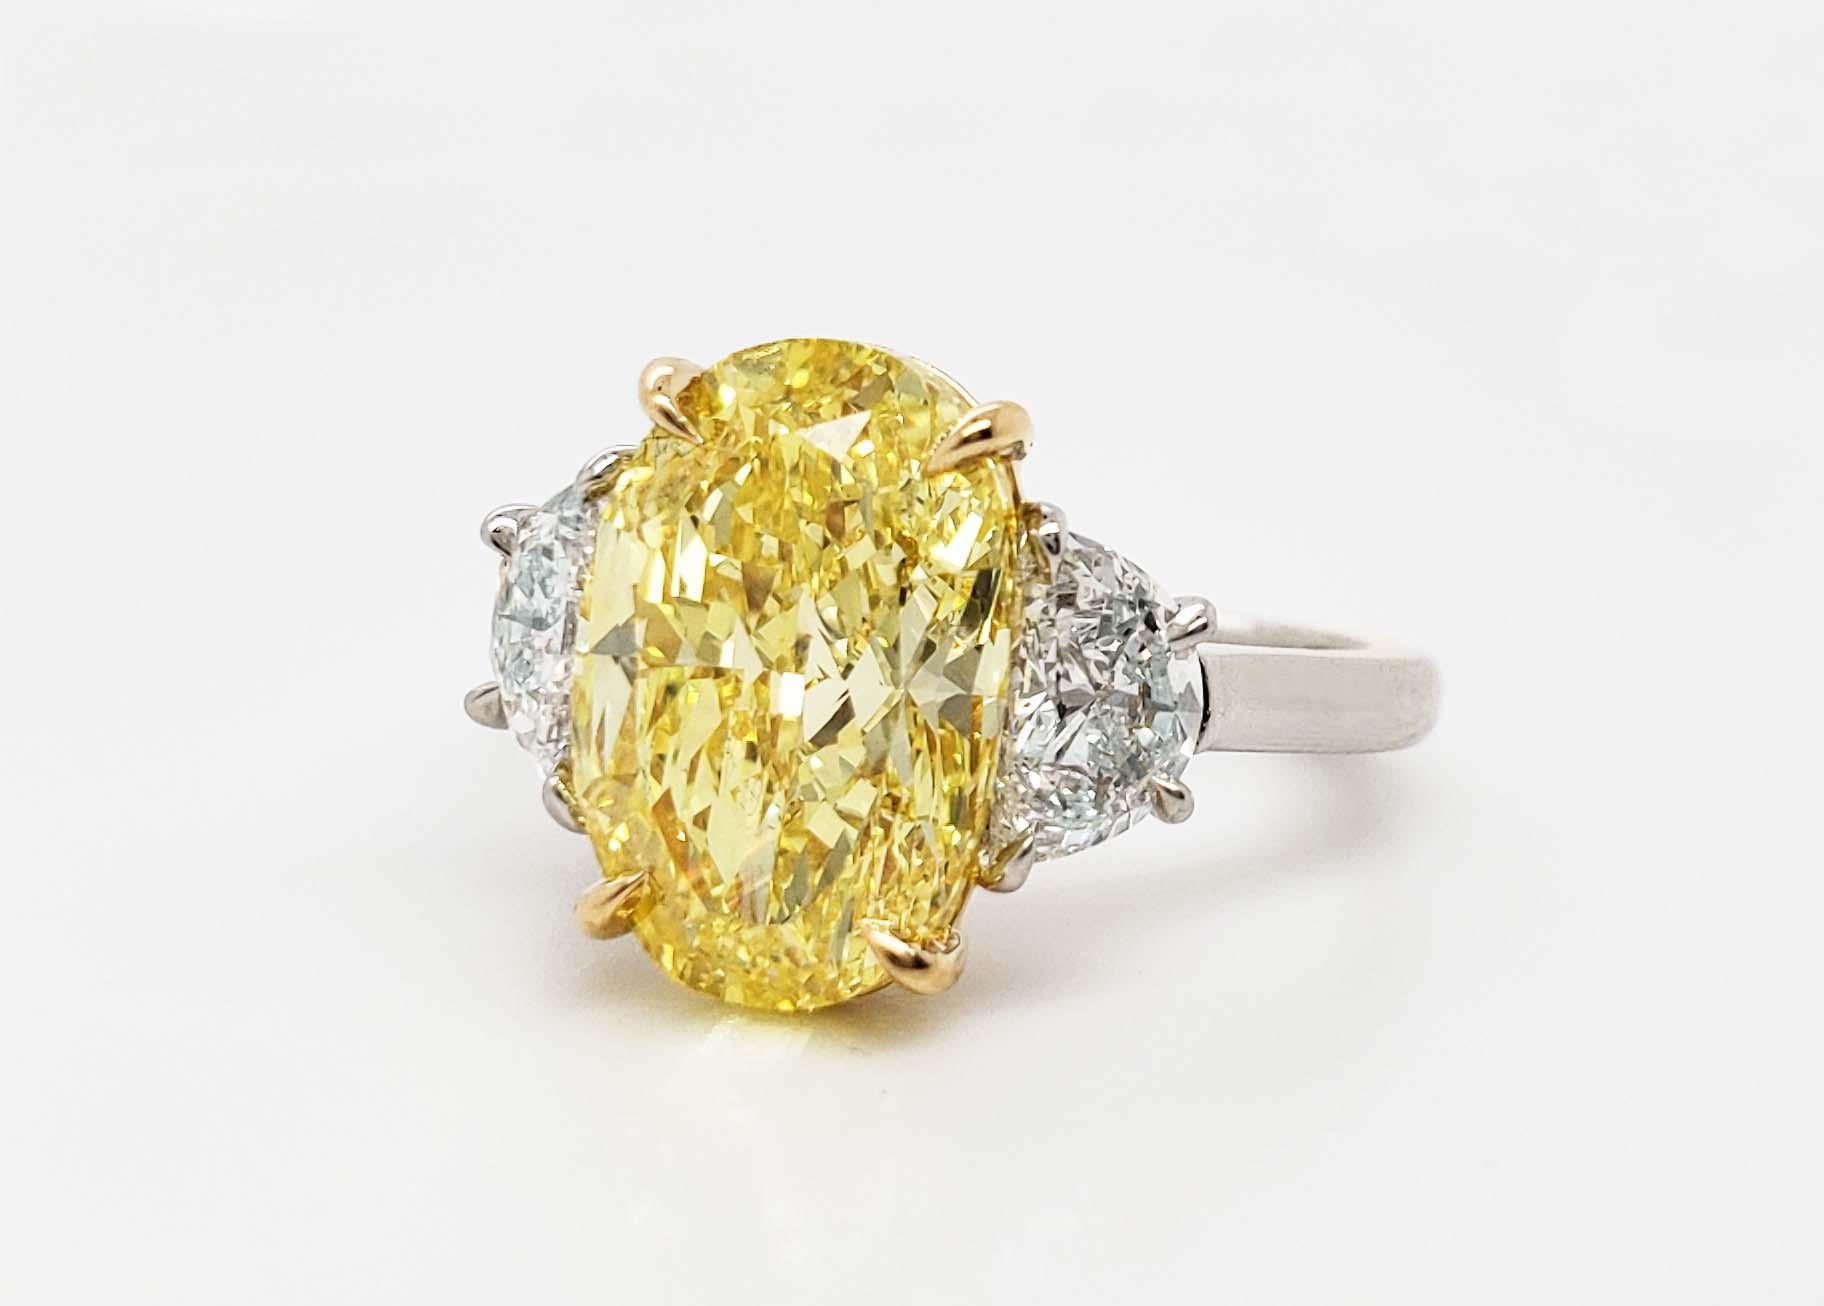 From SCARSELLI, this spectacular 4.70 carat Fancy Vivid Yellow Oval Cut Diamond is GIA certified (see picture of certificate for detailed stone information) and classically set on a hand-made 18k gold & platinum with a pair of white half moon